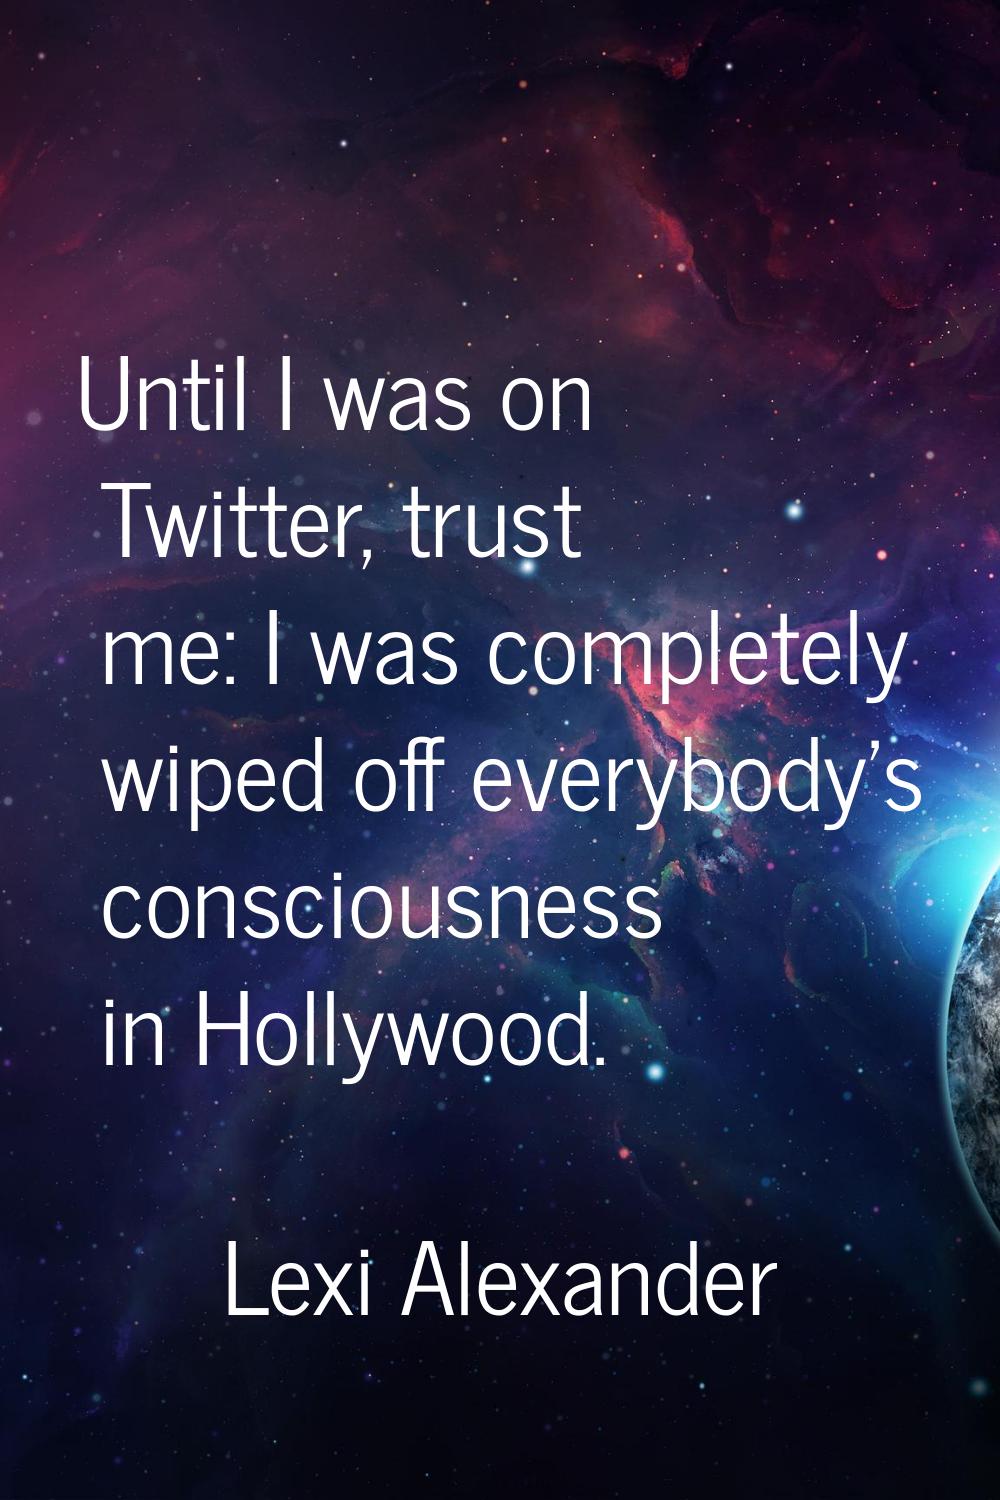 Until I was on Twitter, trust me: I was completely wiped off everybody's consciousness in Hollywood